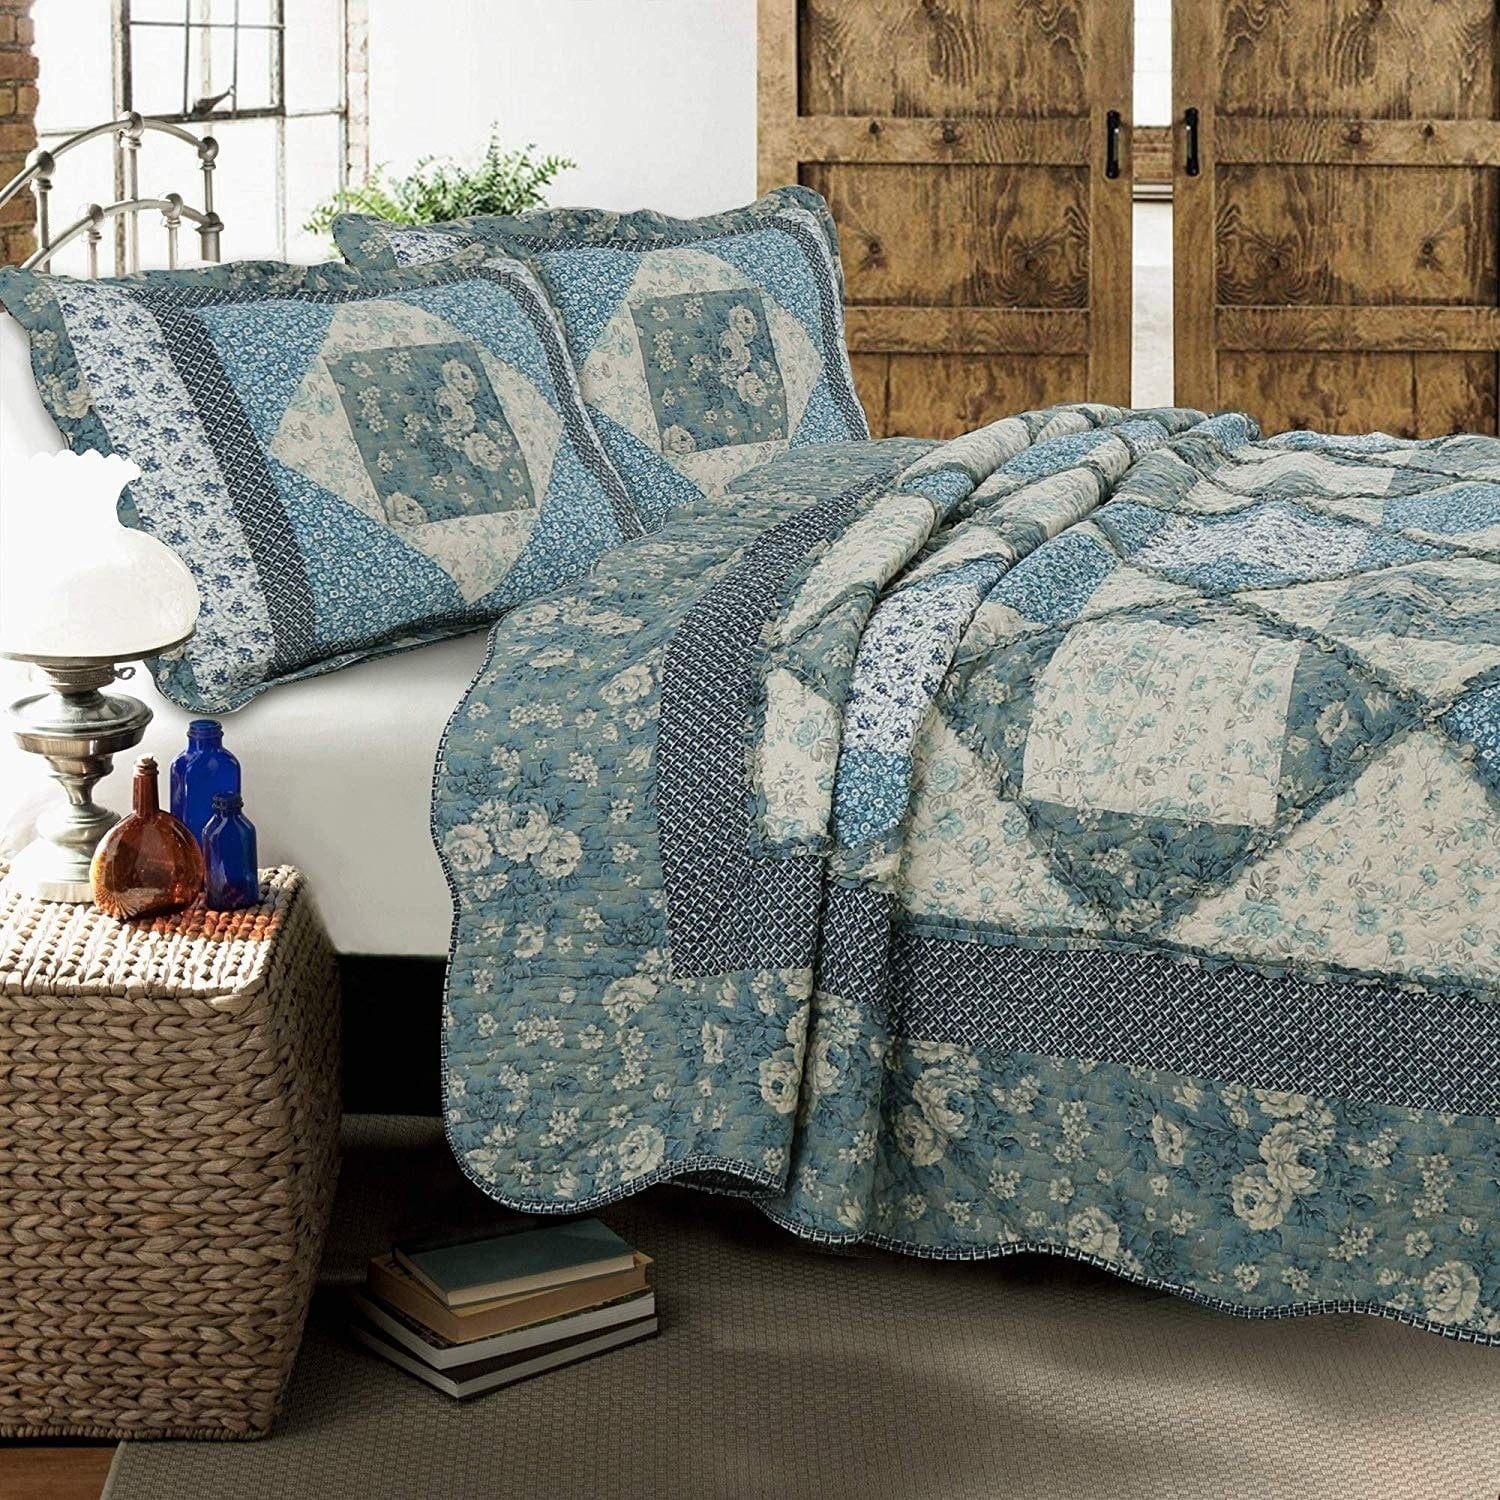 Details about   Patchwork Paisley Flowers Quilted Blanket Colorful Bedspread Twin Queen King 